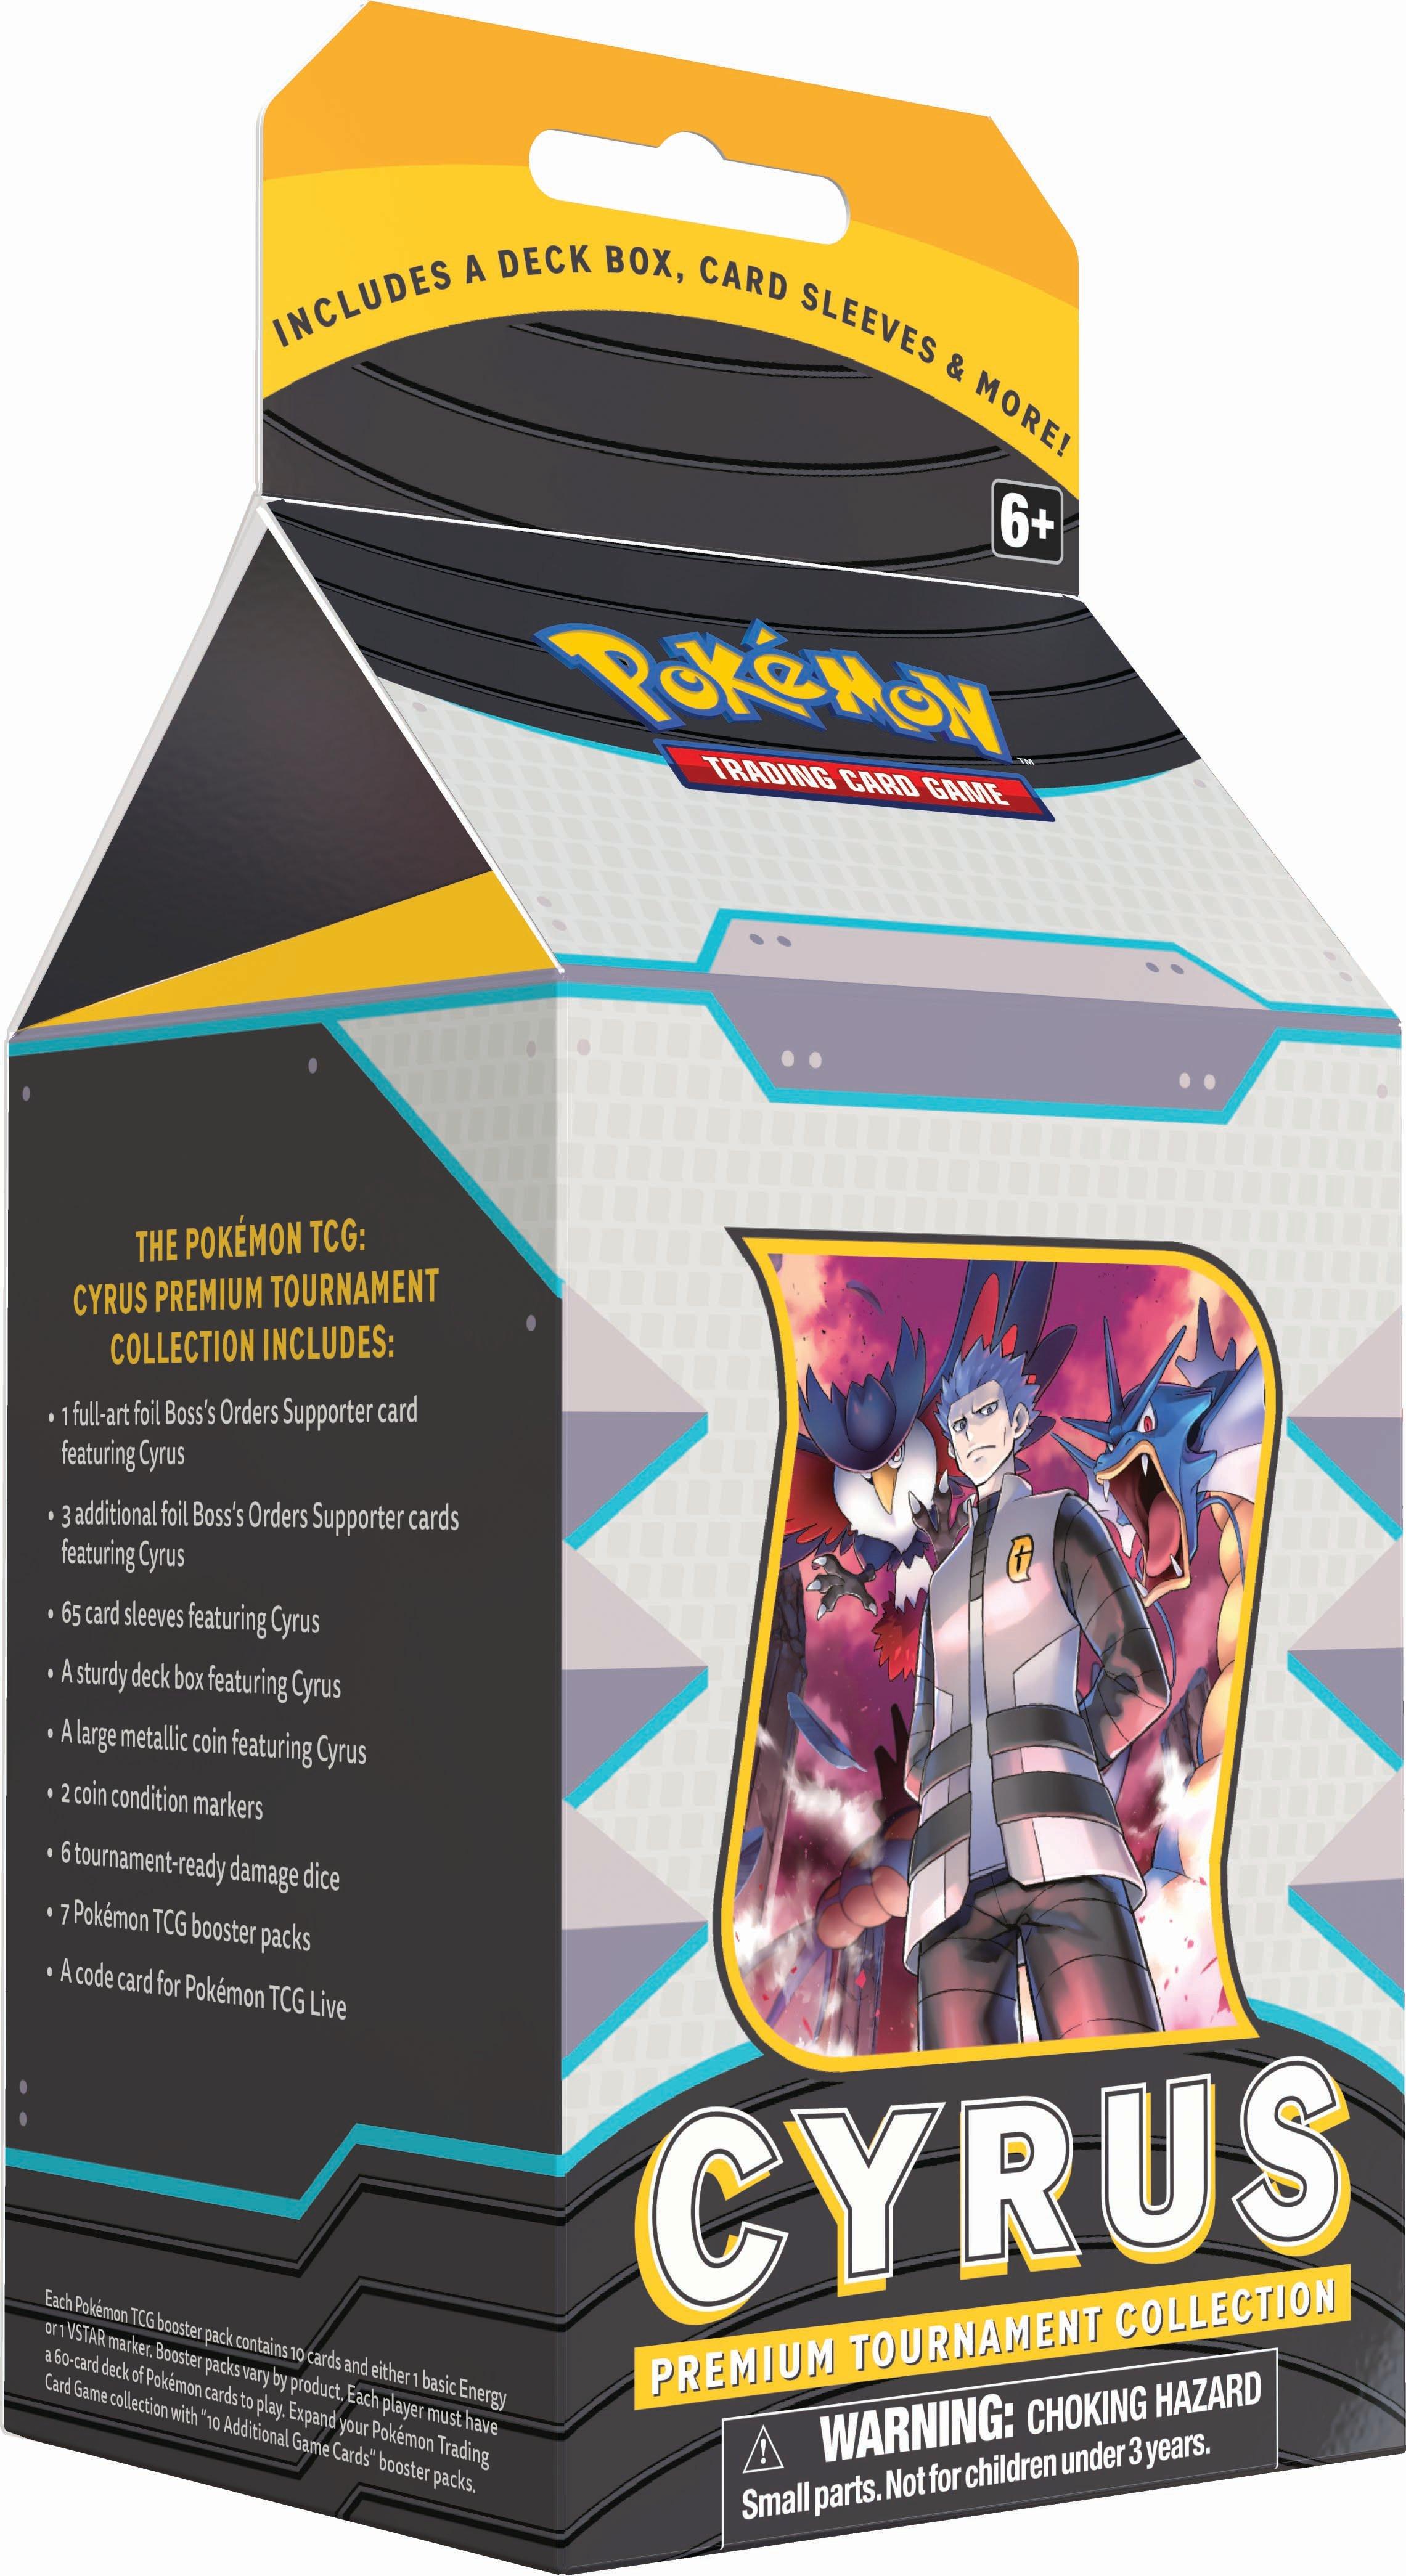 Poke-Collect Pokemon Trading Cards & Collectibles Super Store